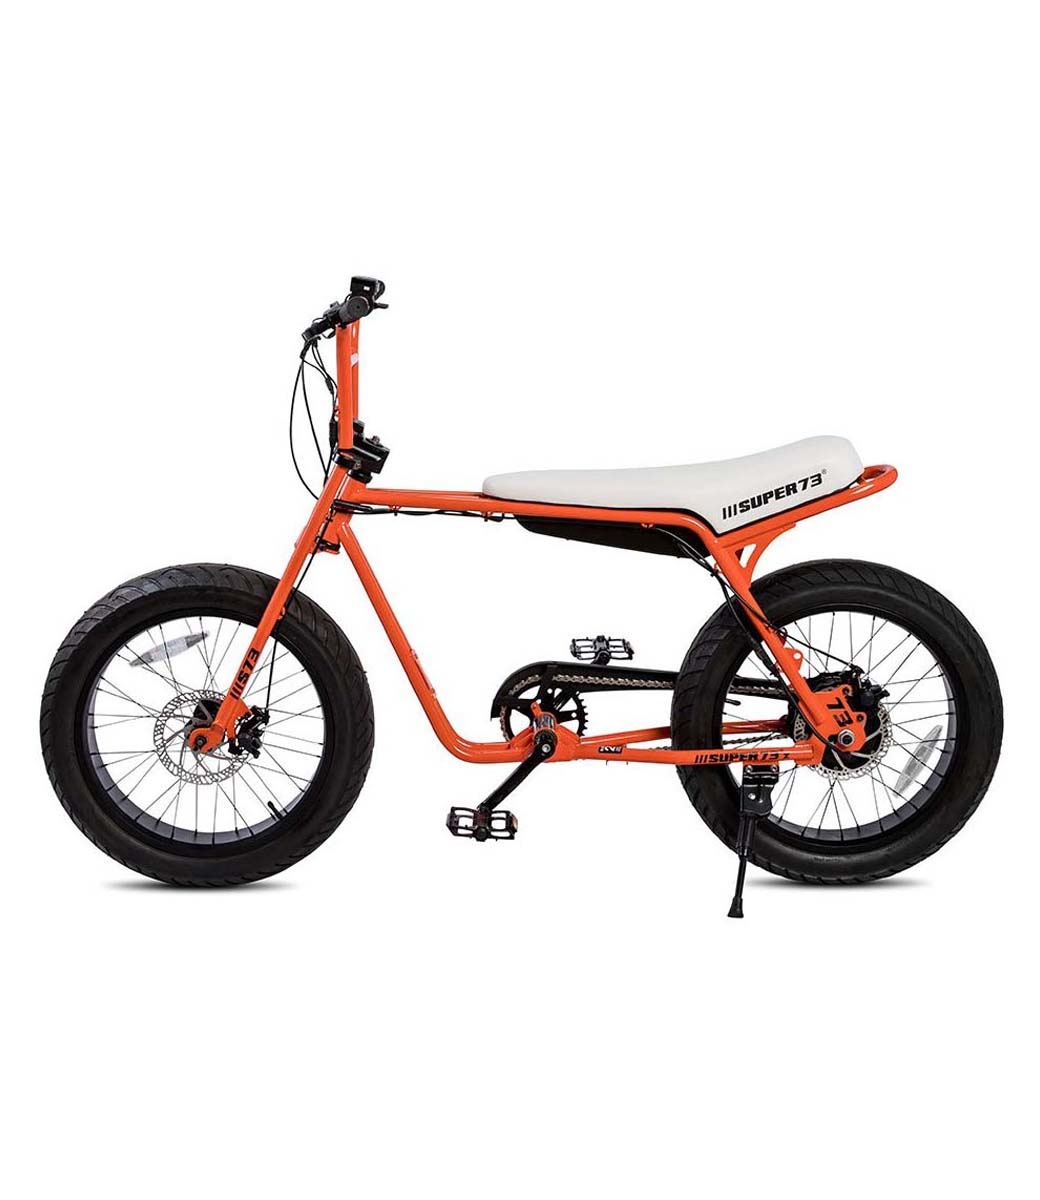 SUPER73-ZG Astro Orange The SUPER73-ZG is perfect for exploring the city. The compact frame and the EPAC 250W internal hub motor make an excellent vehicle for anyone who wants the superior feeling of a regular SUPER73 with a smaller frame.